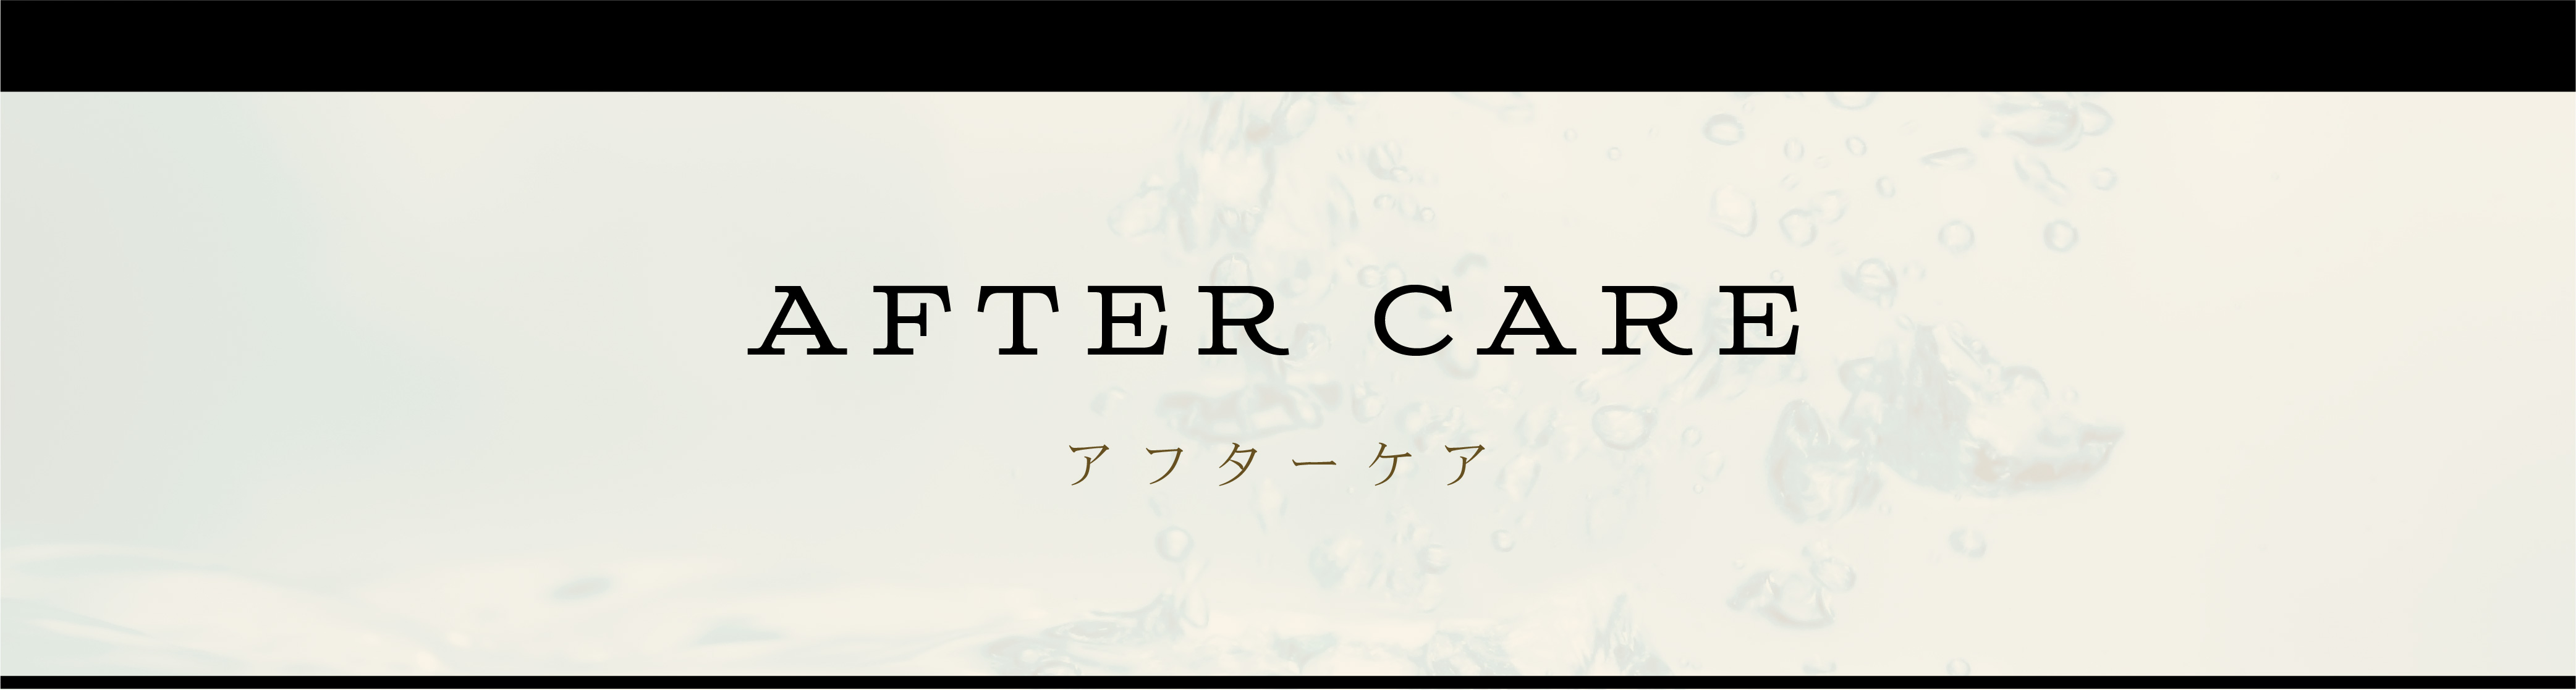 AFTER CARE -アフターケア-